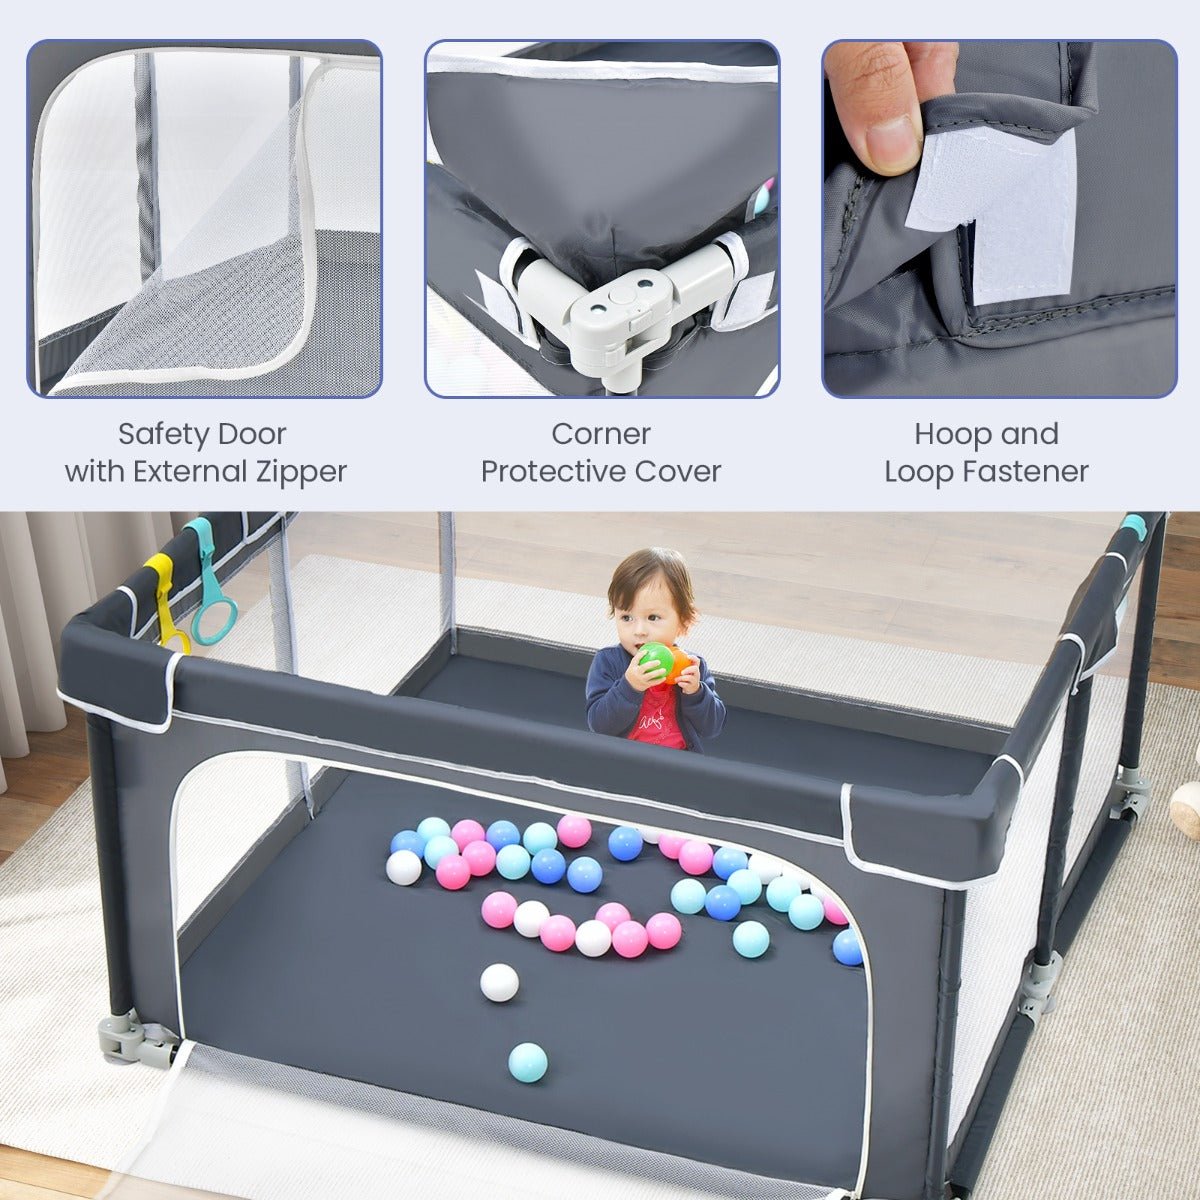 Playpen with Playful Balls